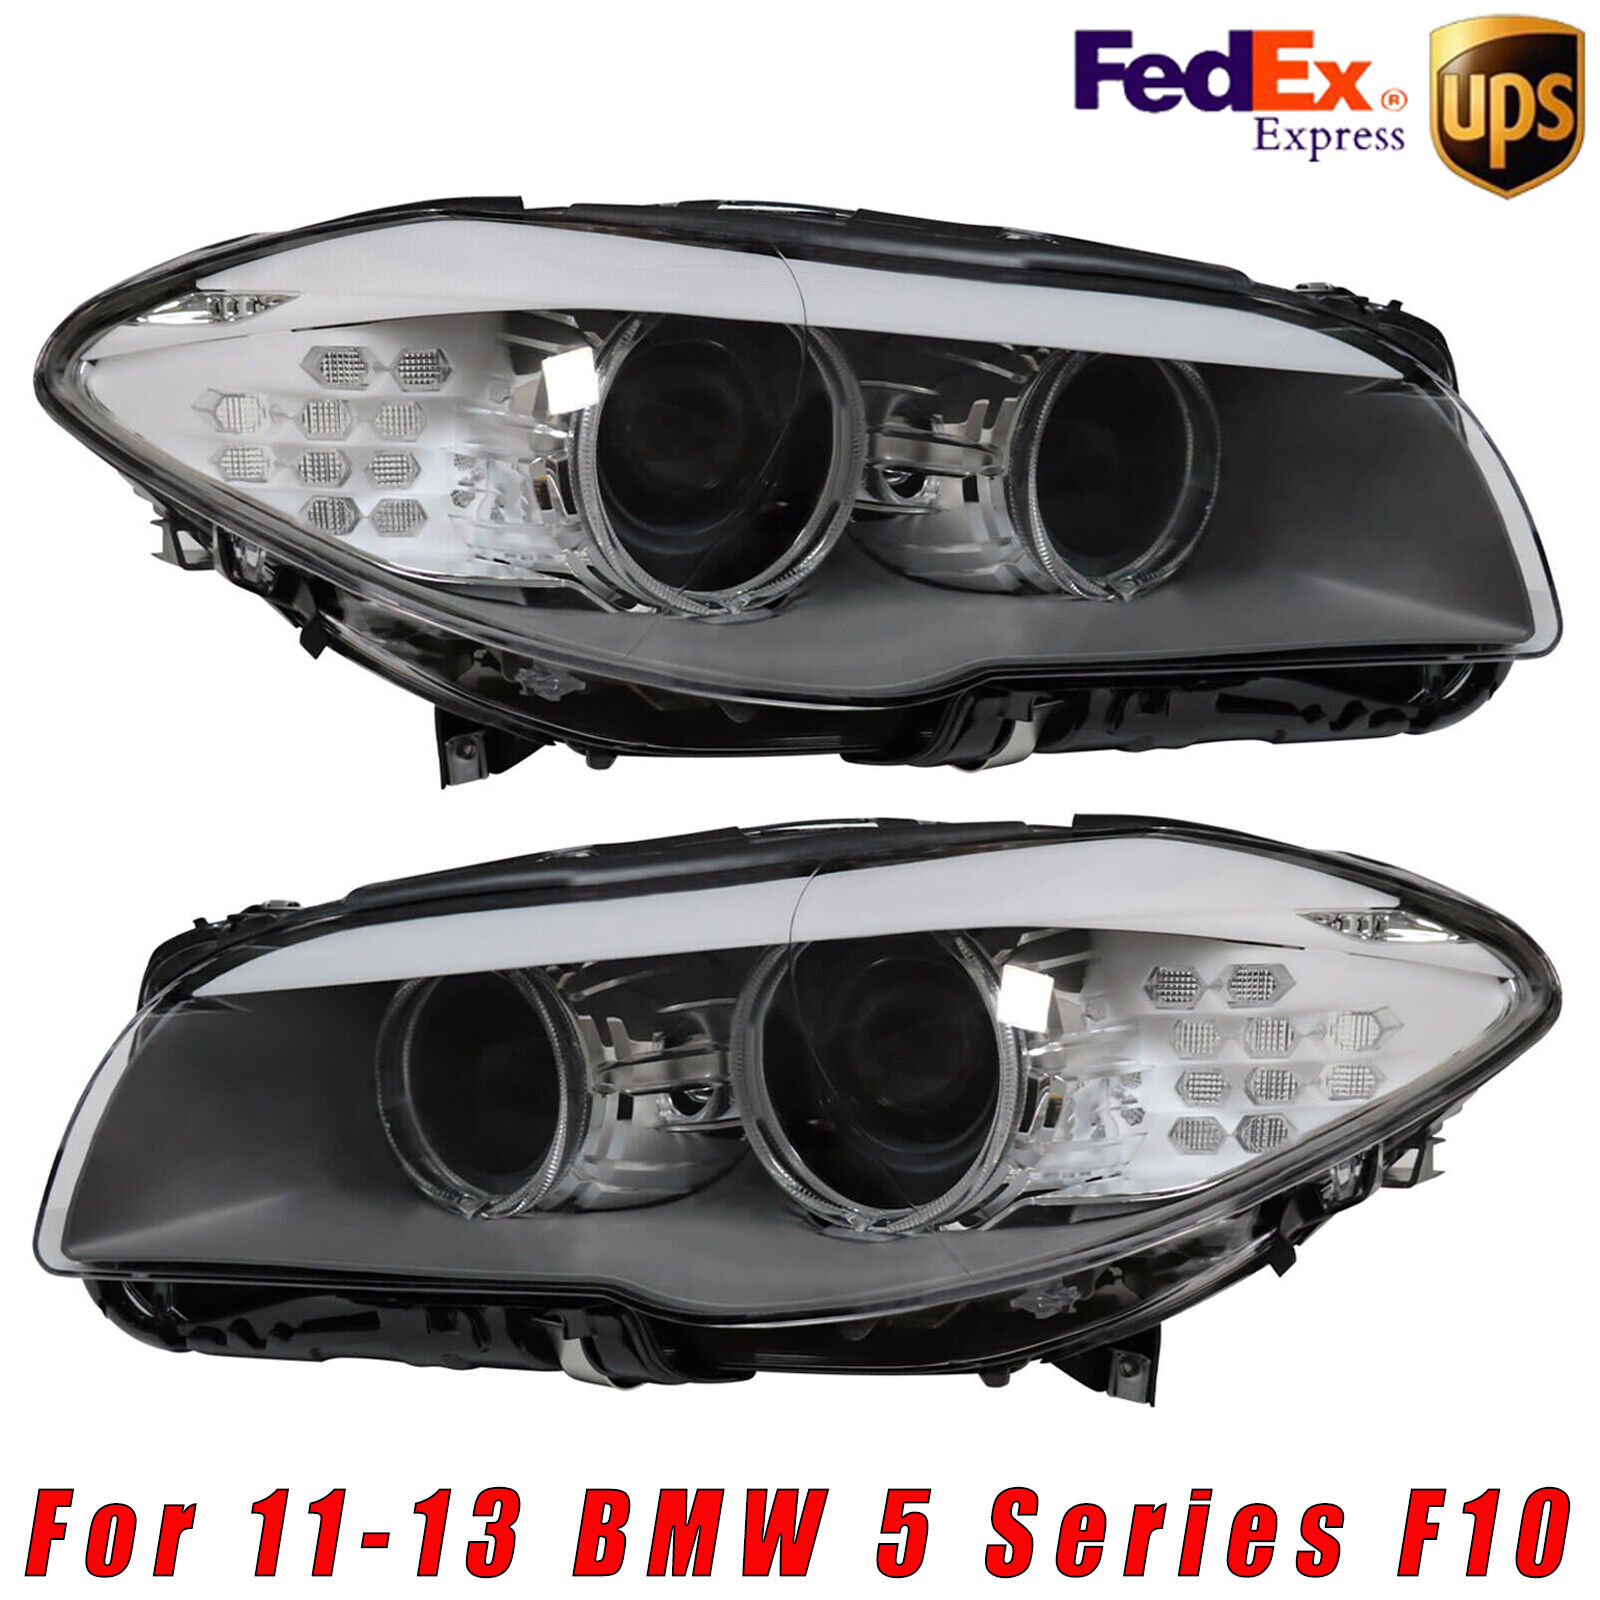 Headlight Assembly Set For 2011-2013 BMW 550i 528i 530i Left+Right with DRL